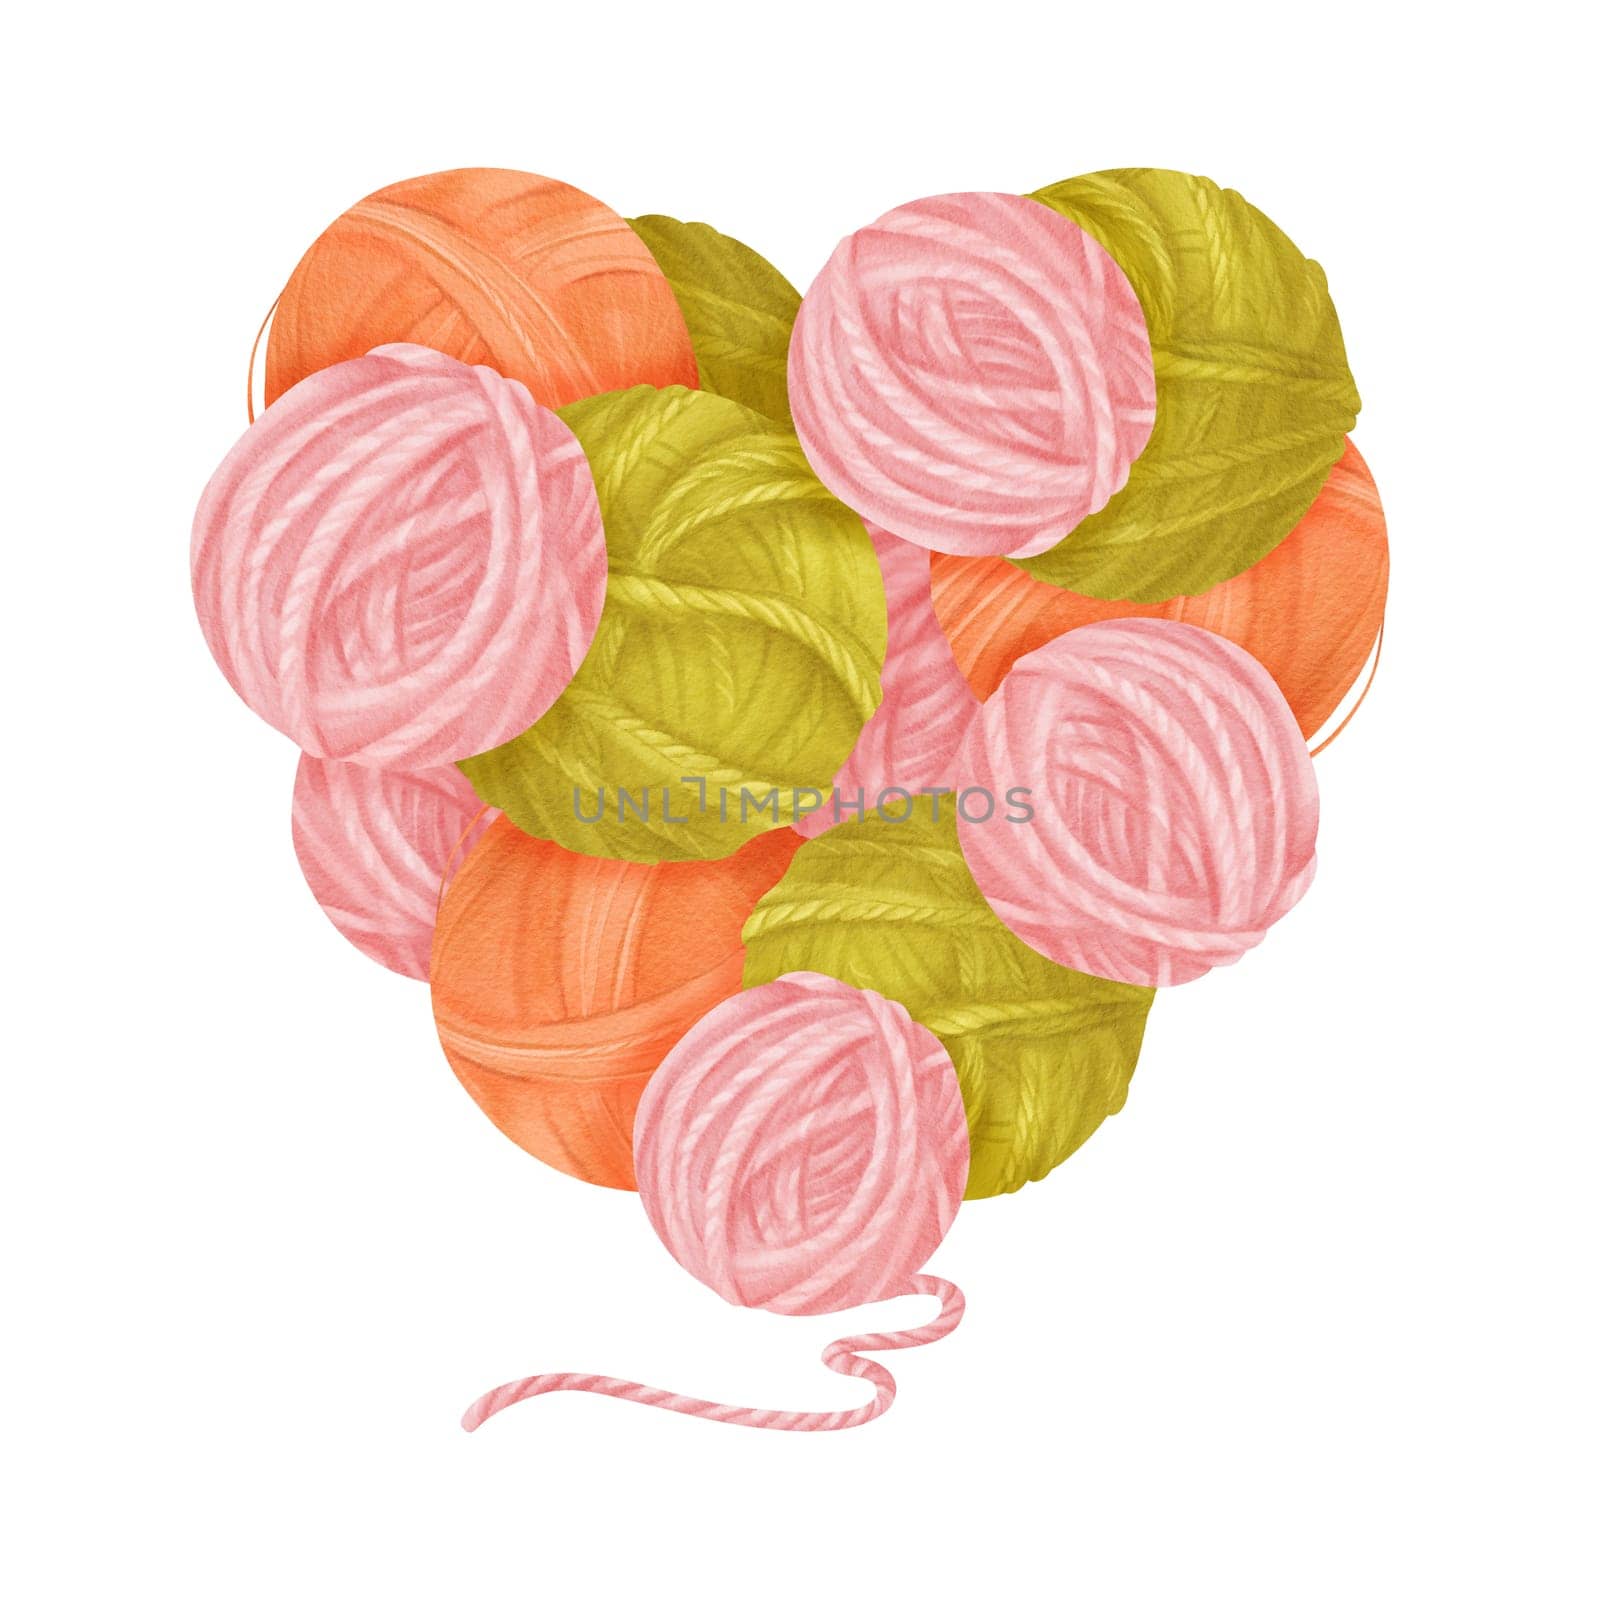 A heart-shaped composition themed around knitting, for knitting and sewing enthusiasts. a heart crafted from yarn skeins in shades of green pink and orange, for crafting projects or DIY-themed designs by Art_Mari_Ka